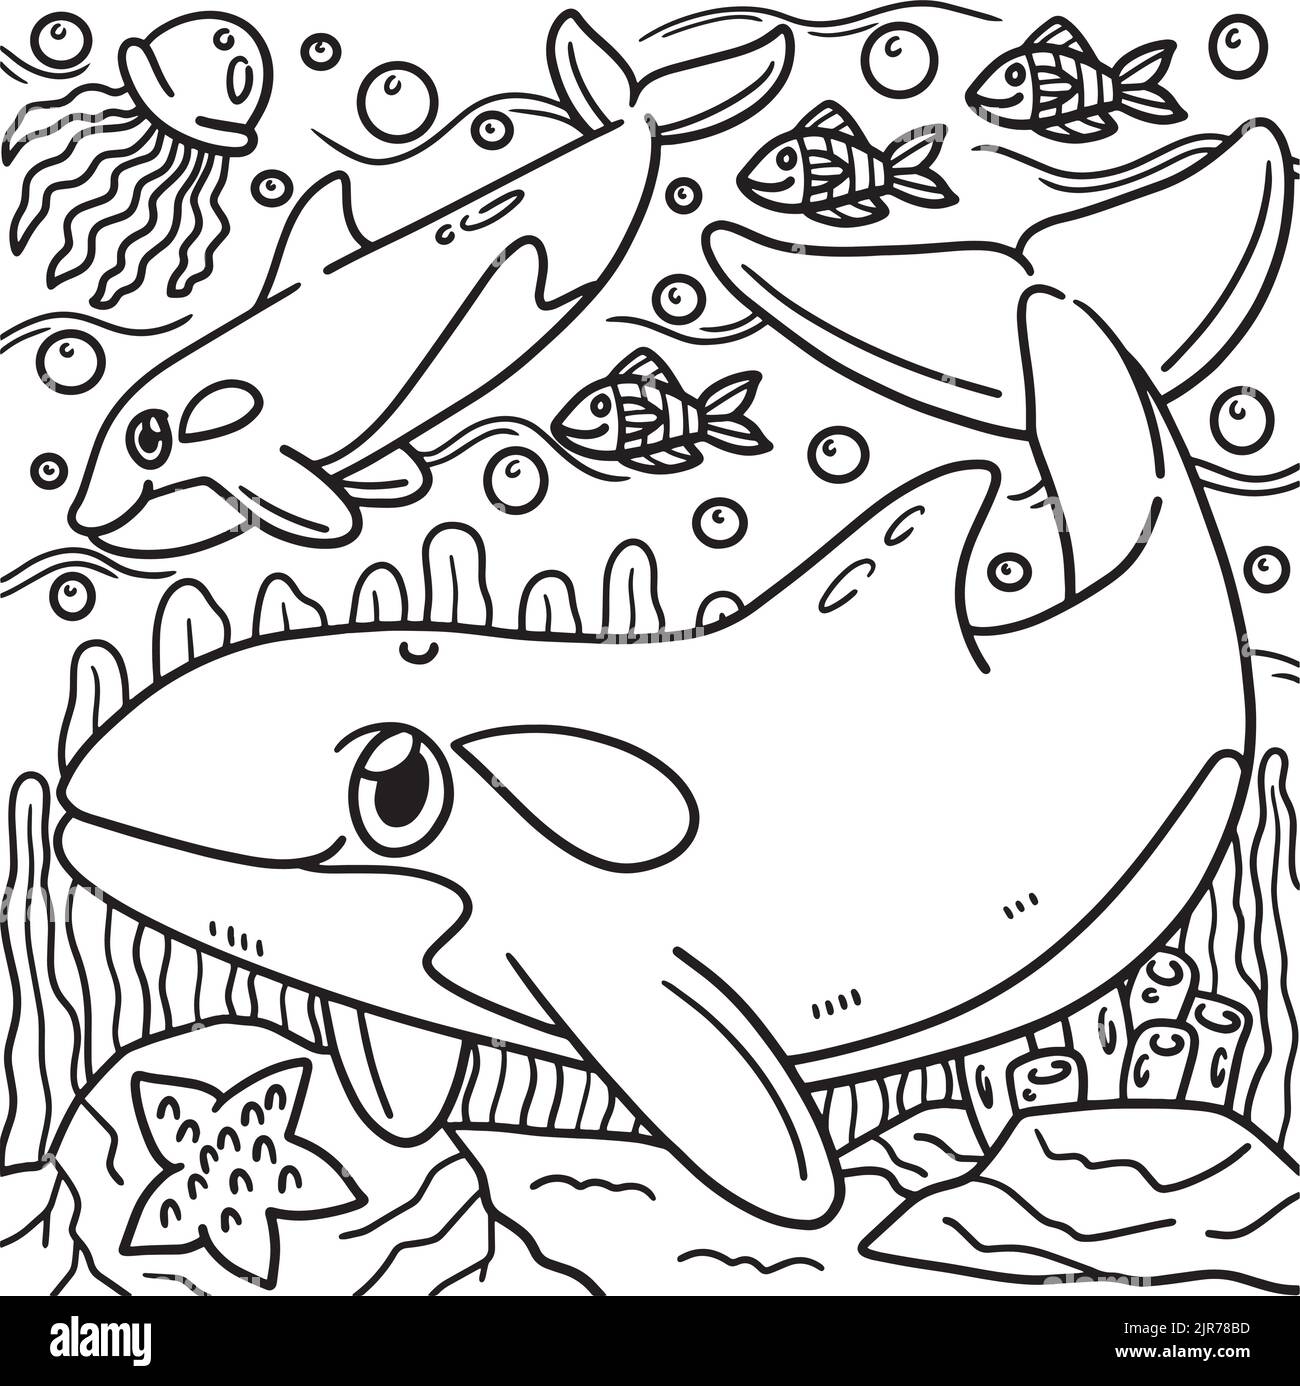 Killer Whale Coloring Page for Kids Stock Vector